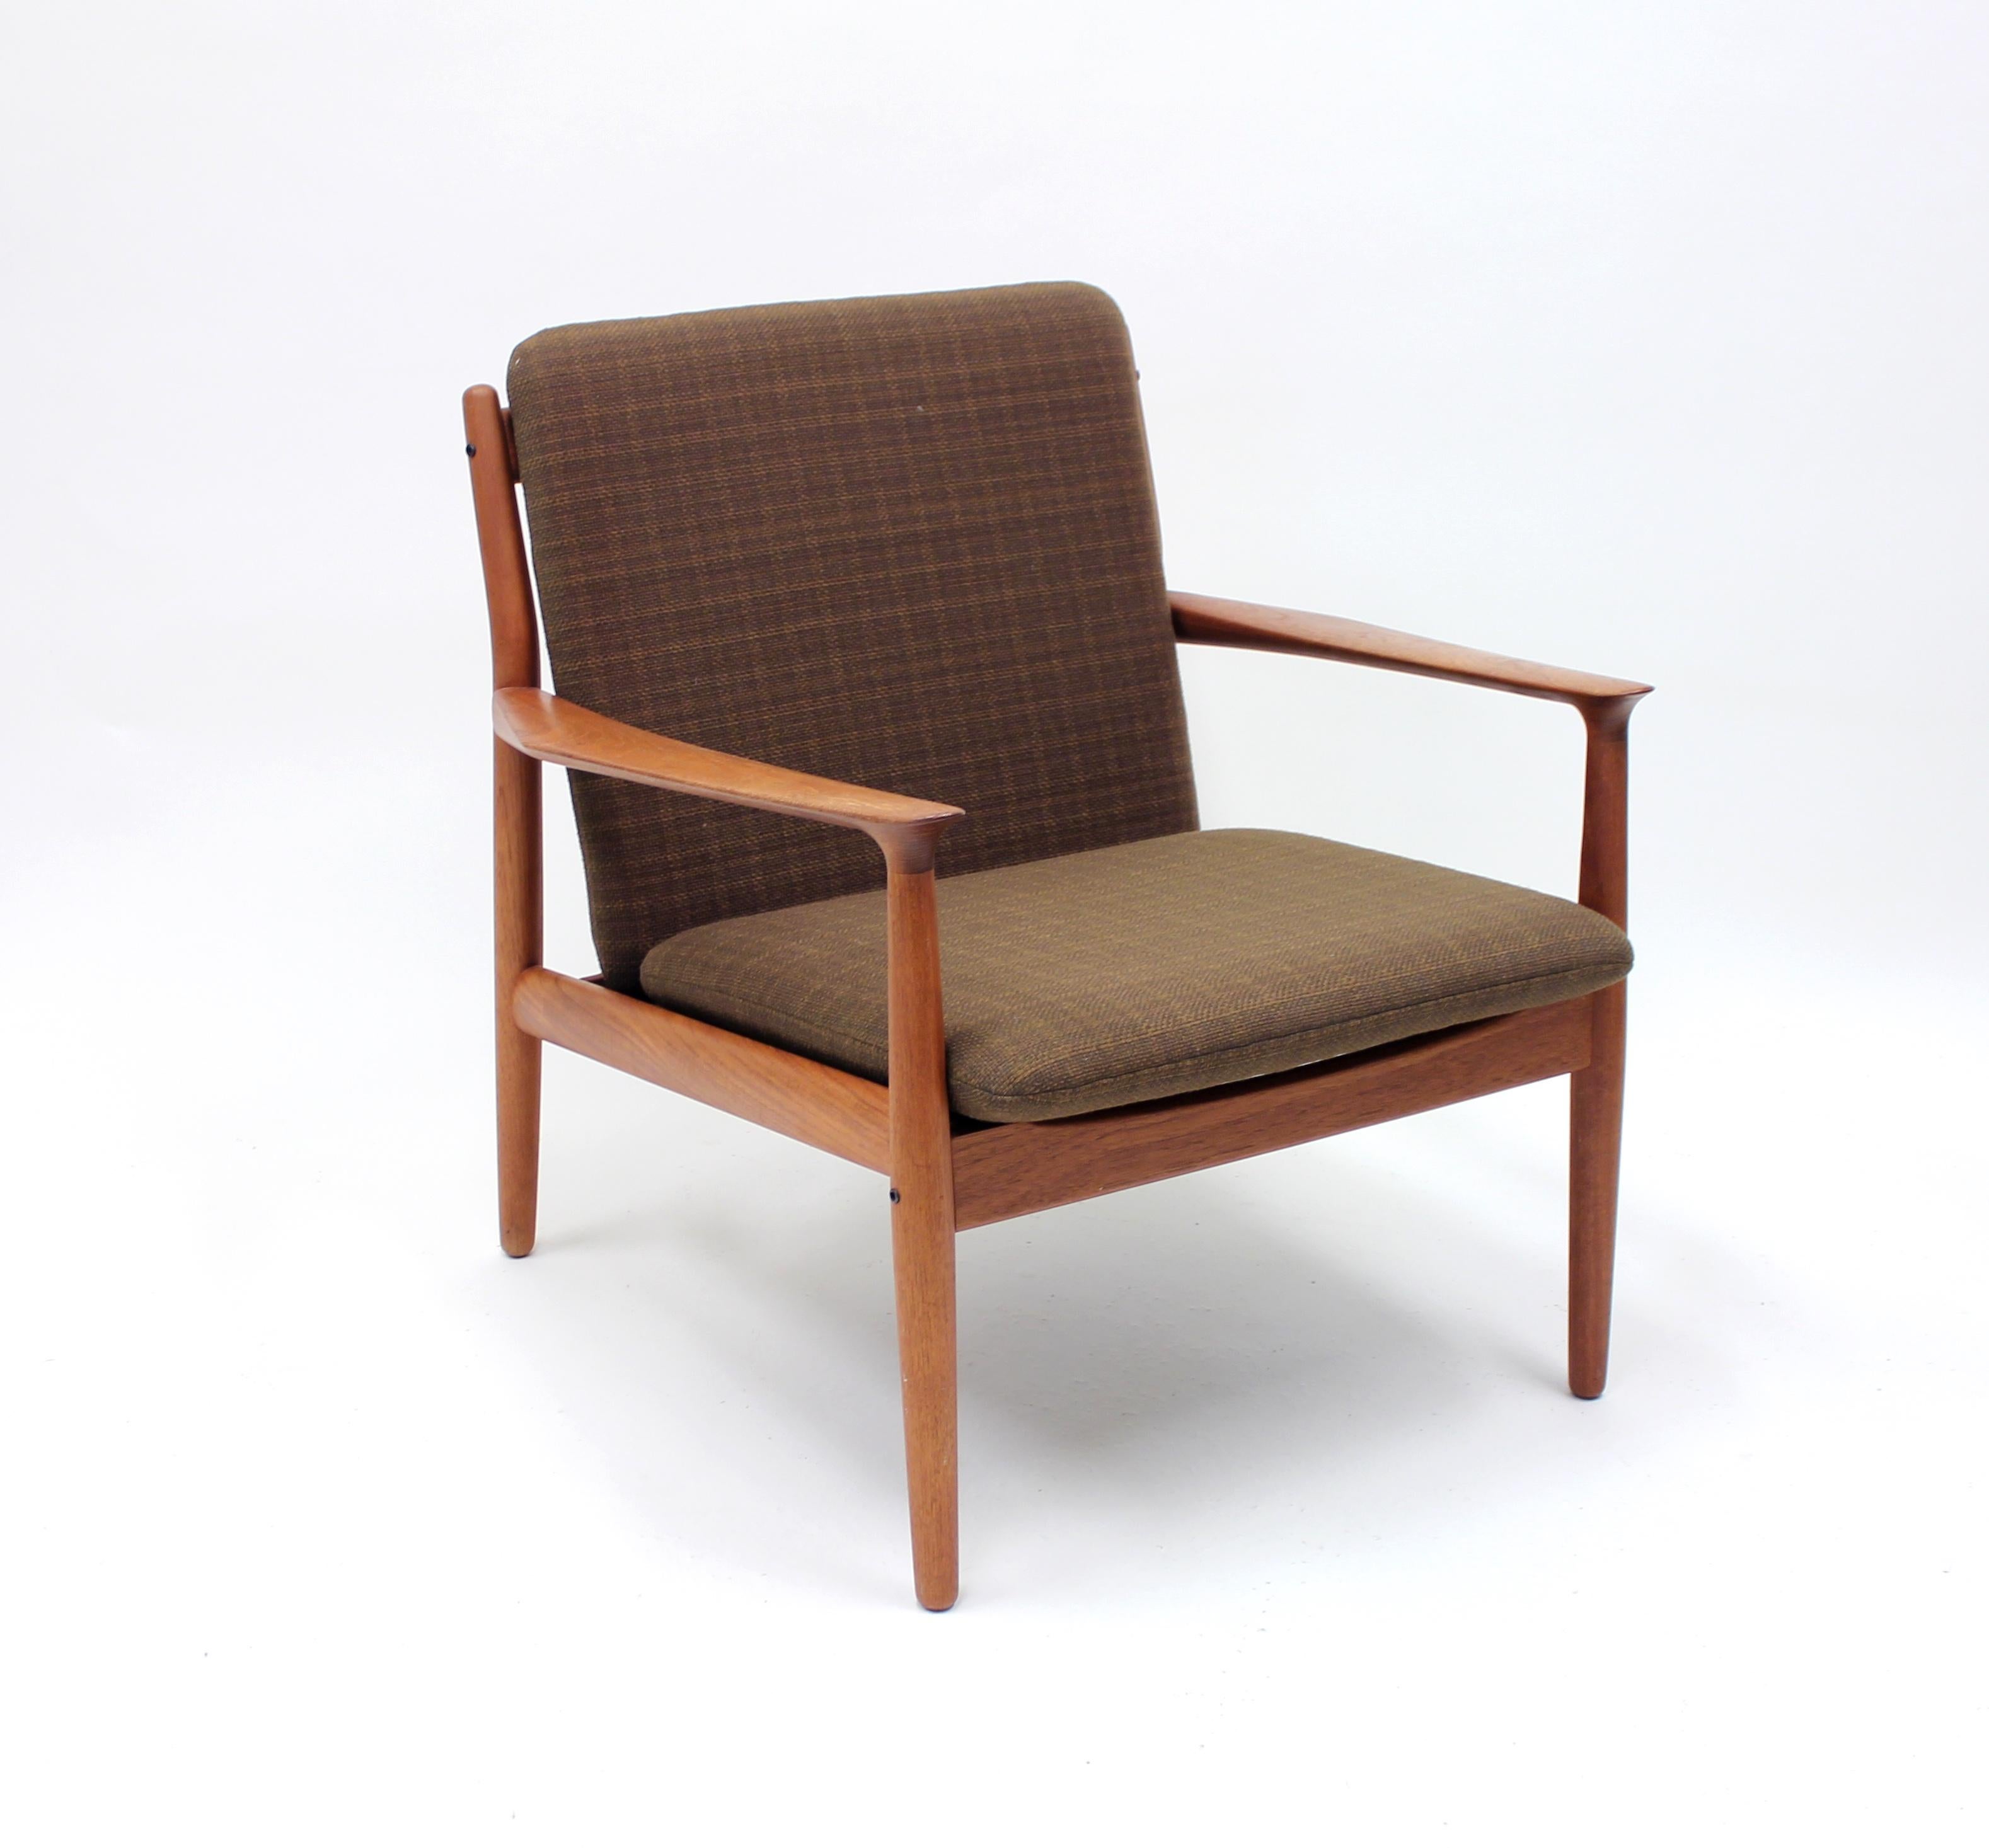 Danish teak lounge chair designed by Grete Talk for Glostrup Møbelfabrik in the 1950s. Very good condition with the original brown or green fabric. Marked with makers mark on the frame.